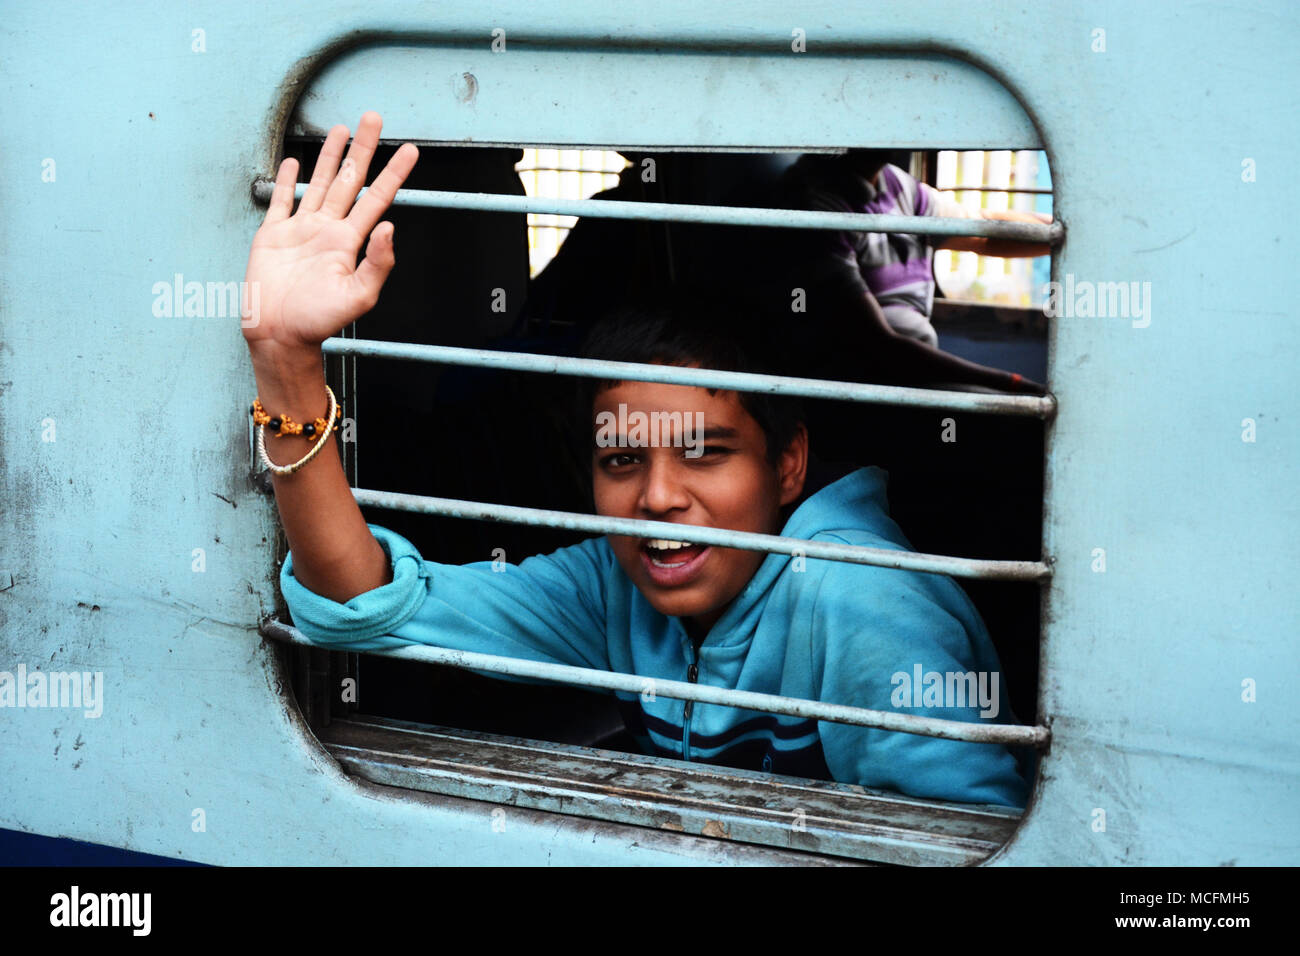 A very friendly young boy waving from the carriage of a train in India Stock Photo